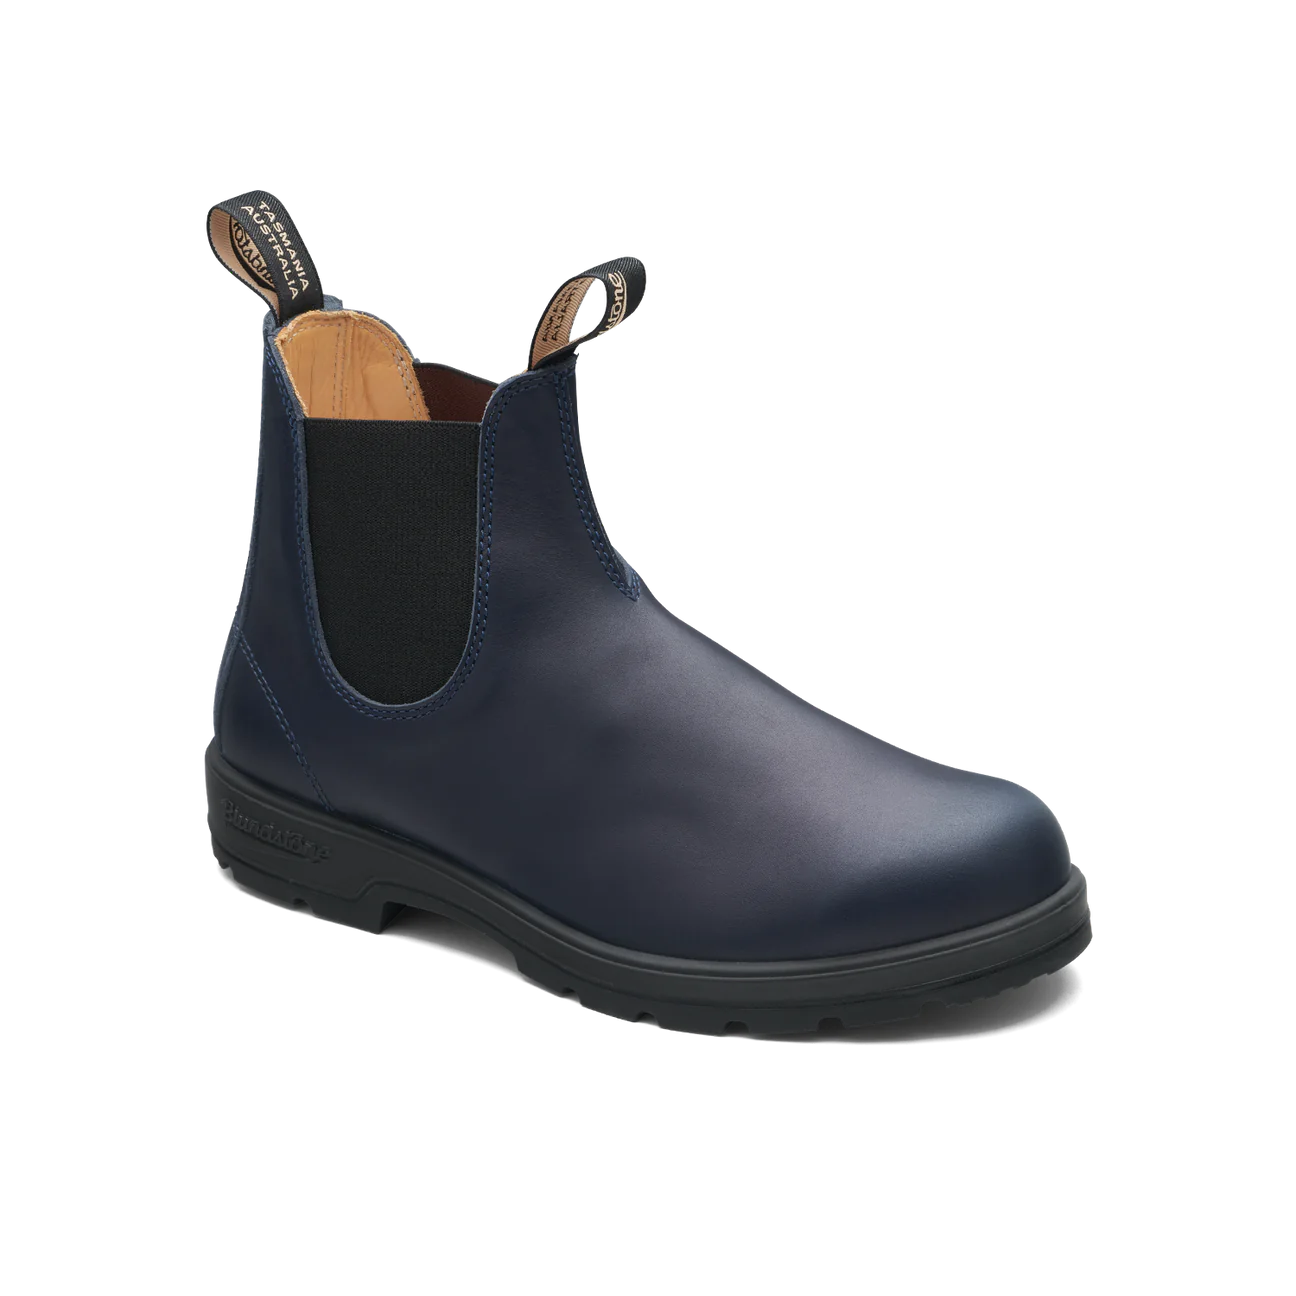 Blundstone Classic Navy Boot, 2246